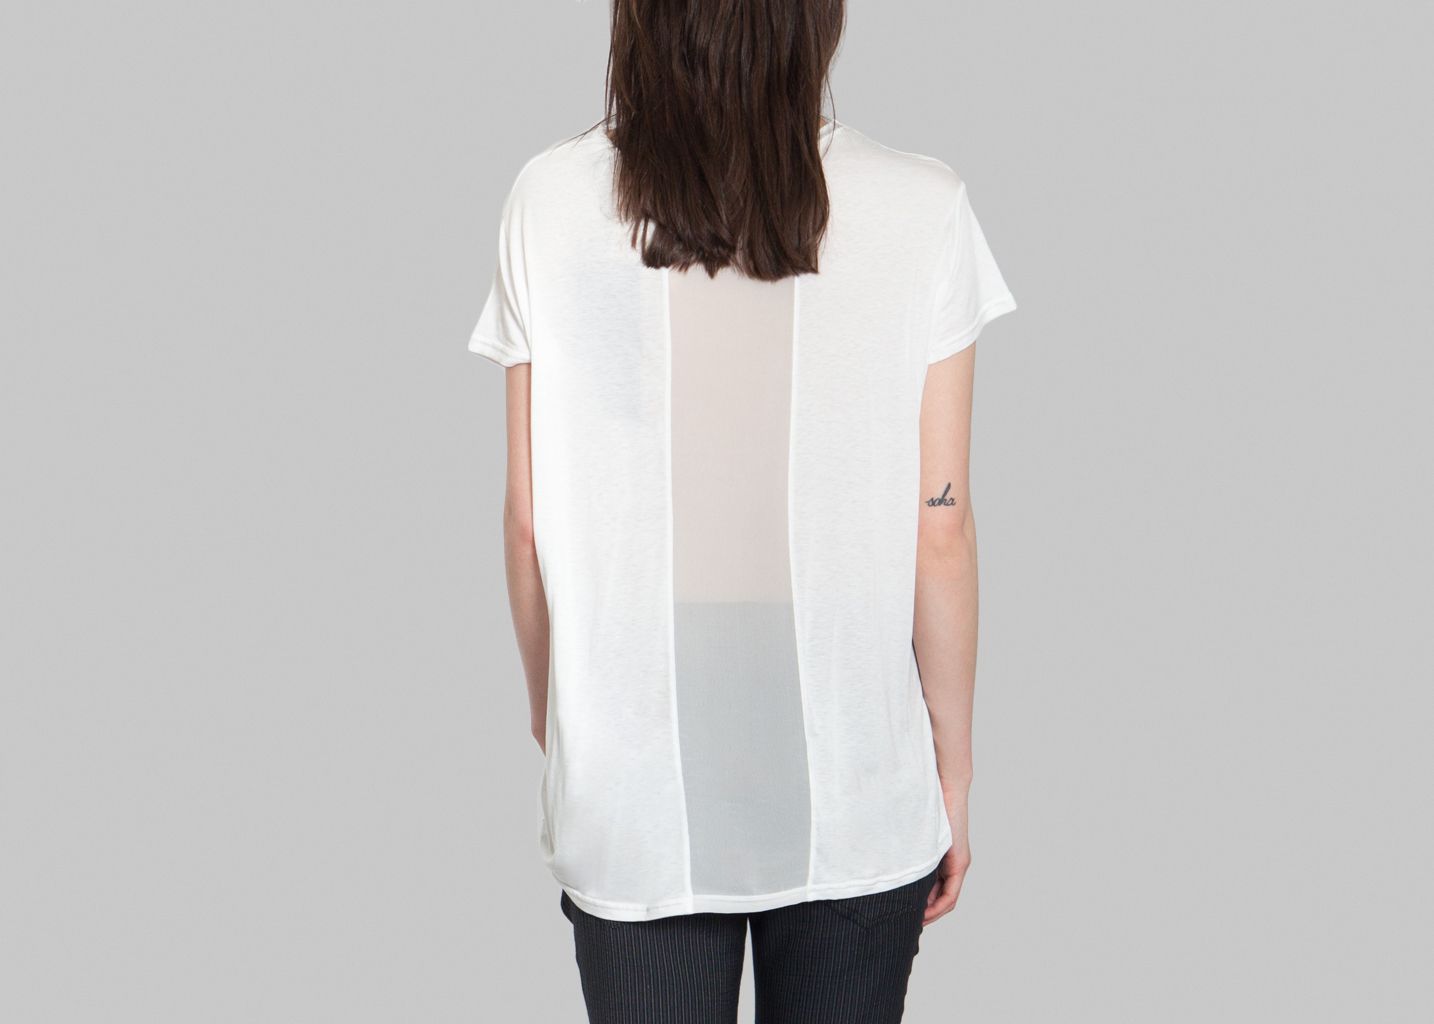 Andy T-shirt - Margaux Lonnberg